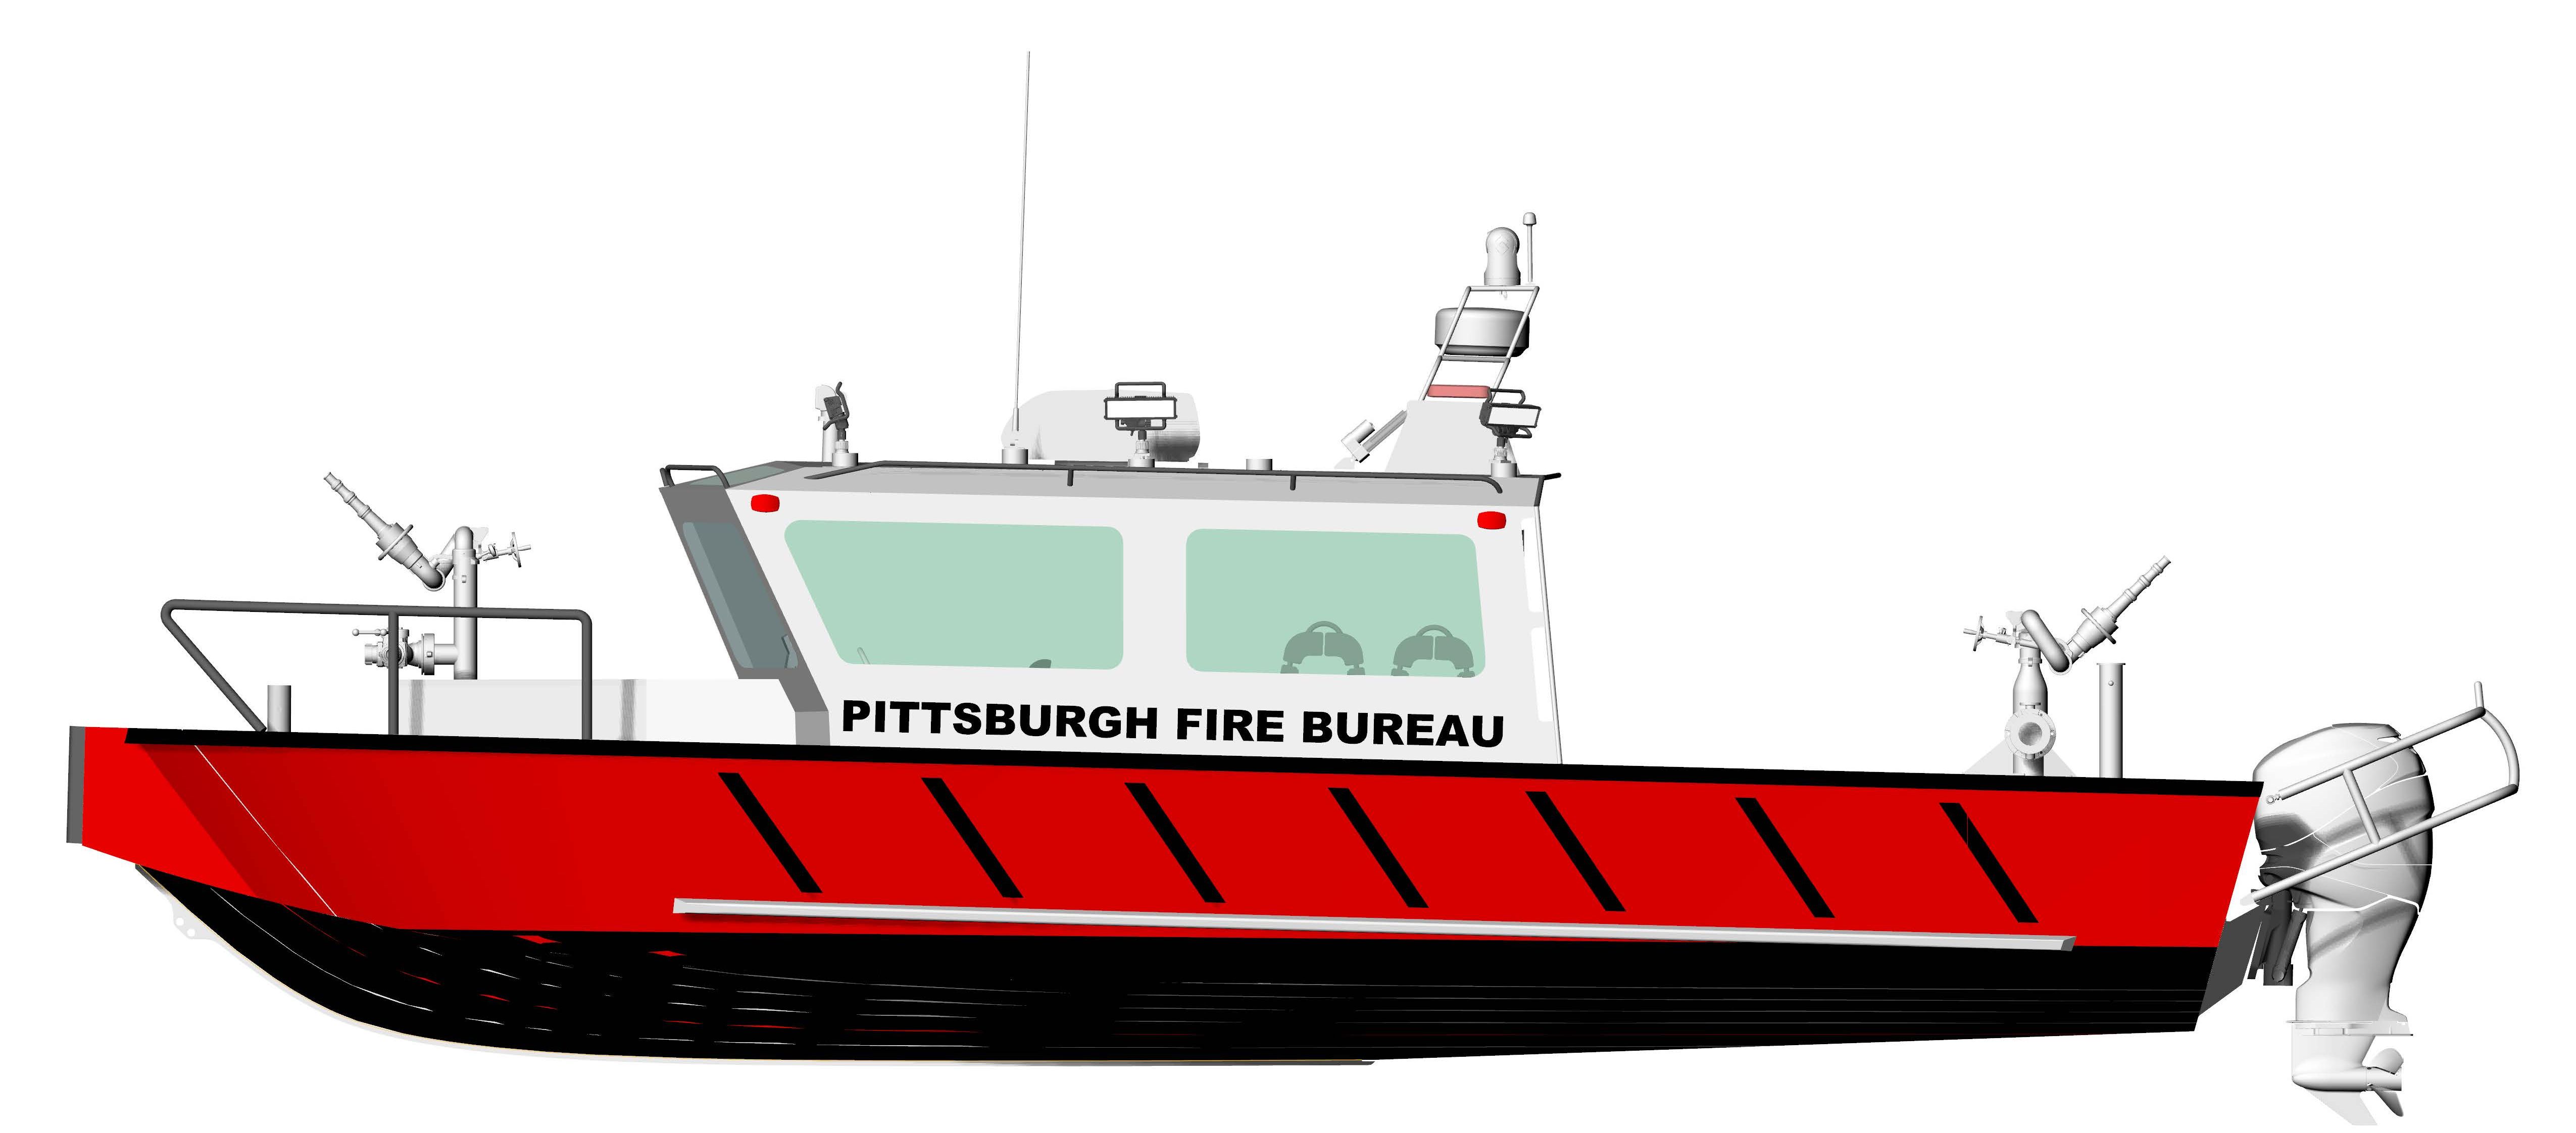 THE CITY OF PITTSBURGH SELECTS LAKE ASSAULT TO BUILD FIREBOAT TO ...